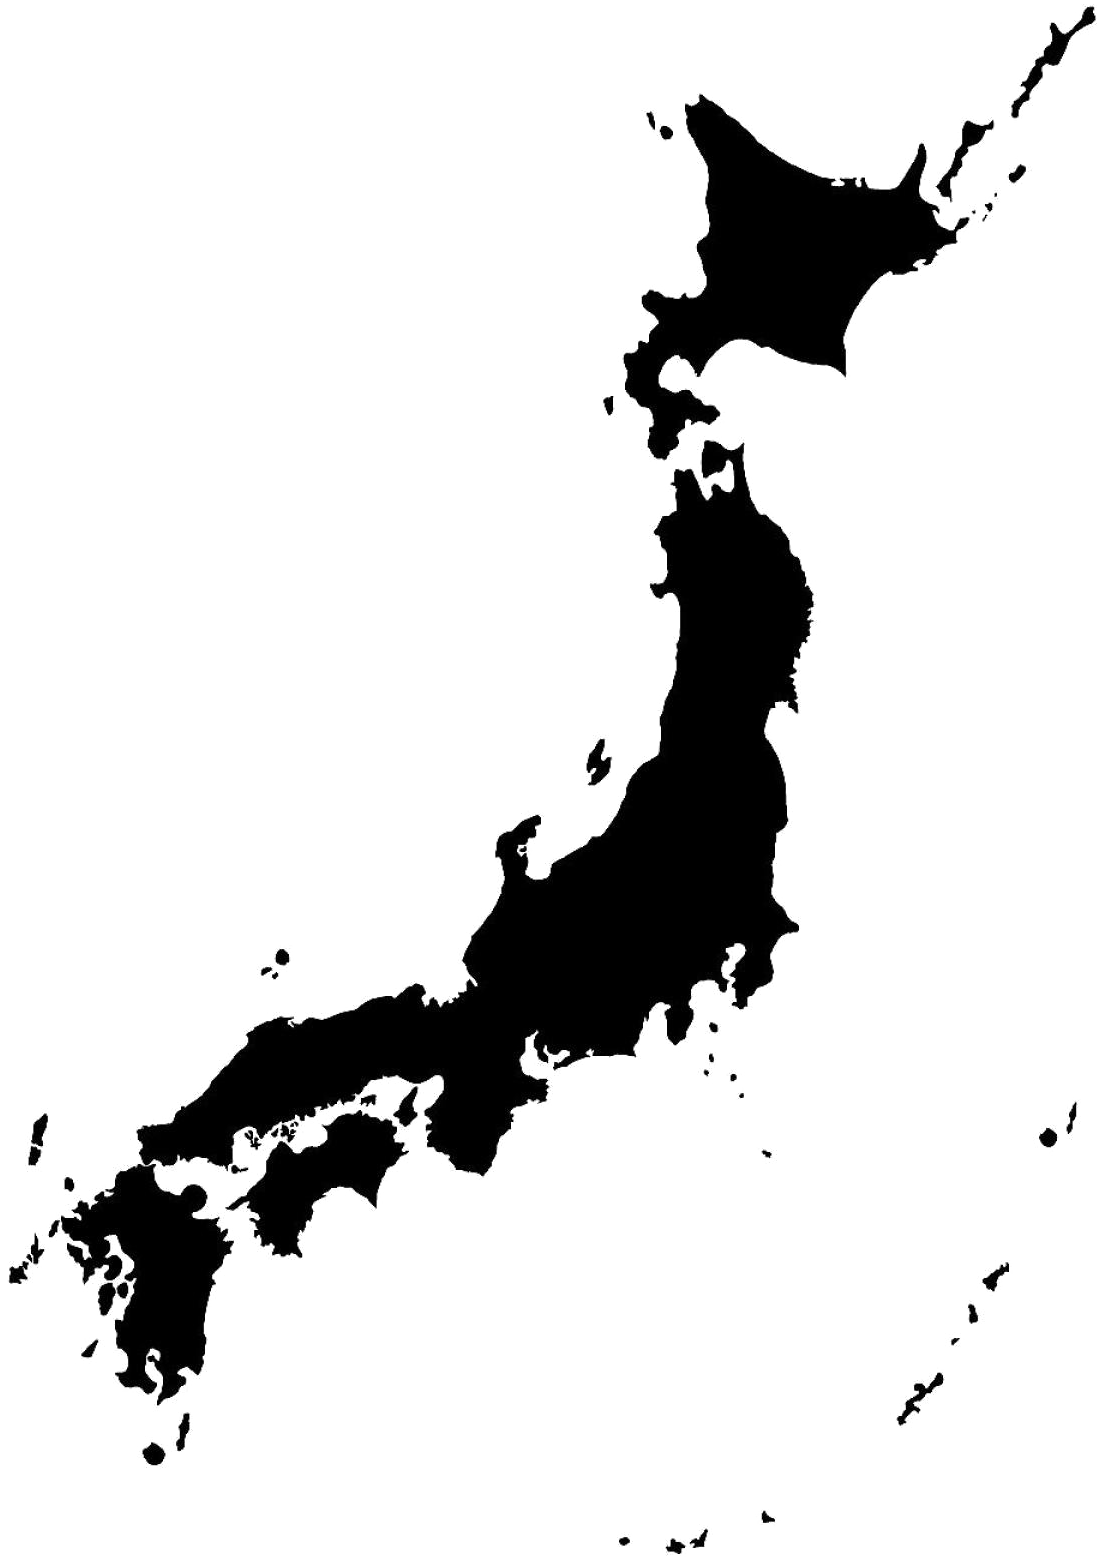 A Map Of Japan On A Black Background